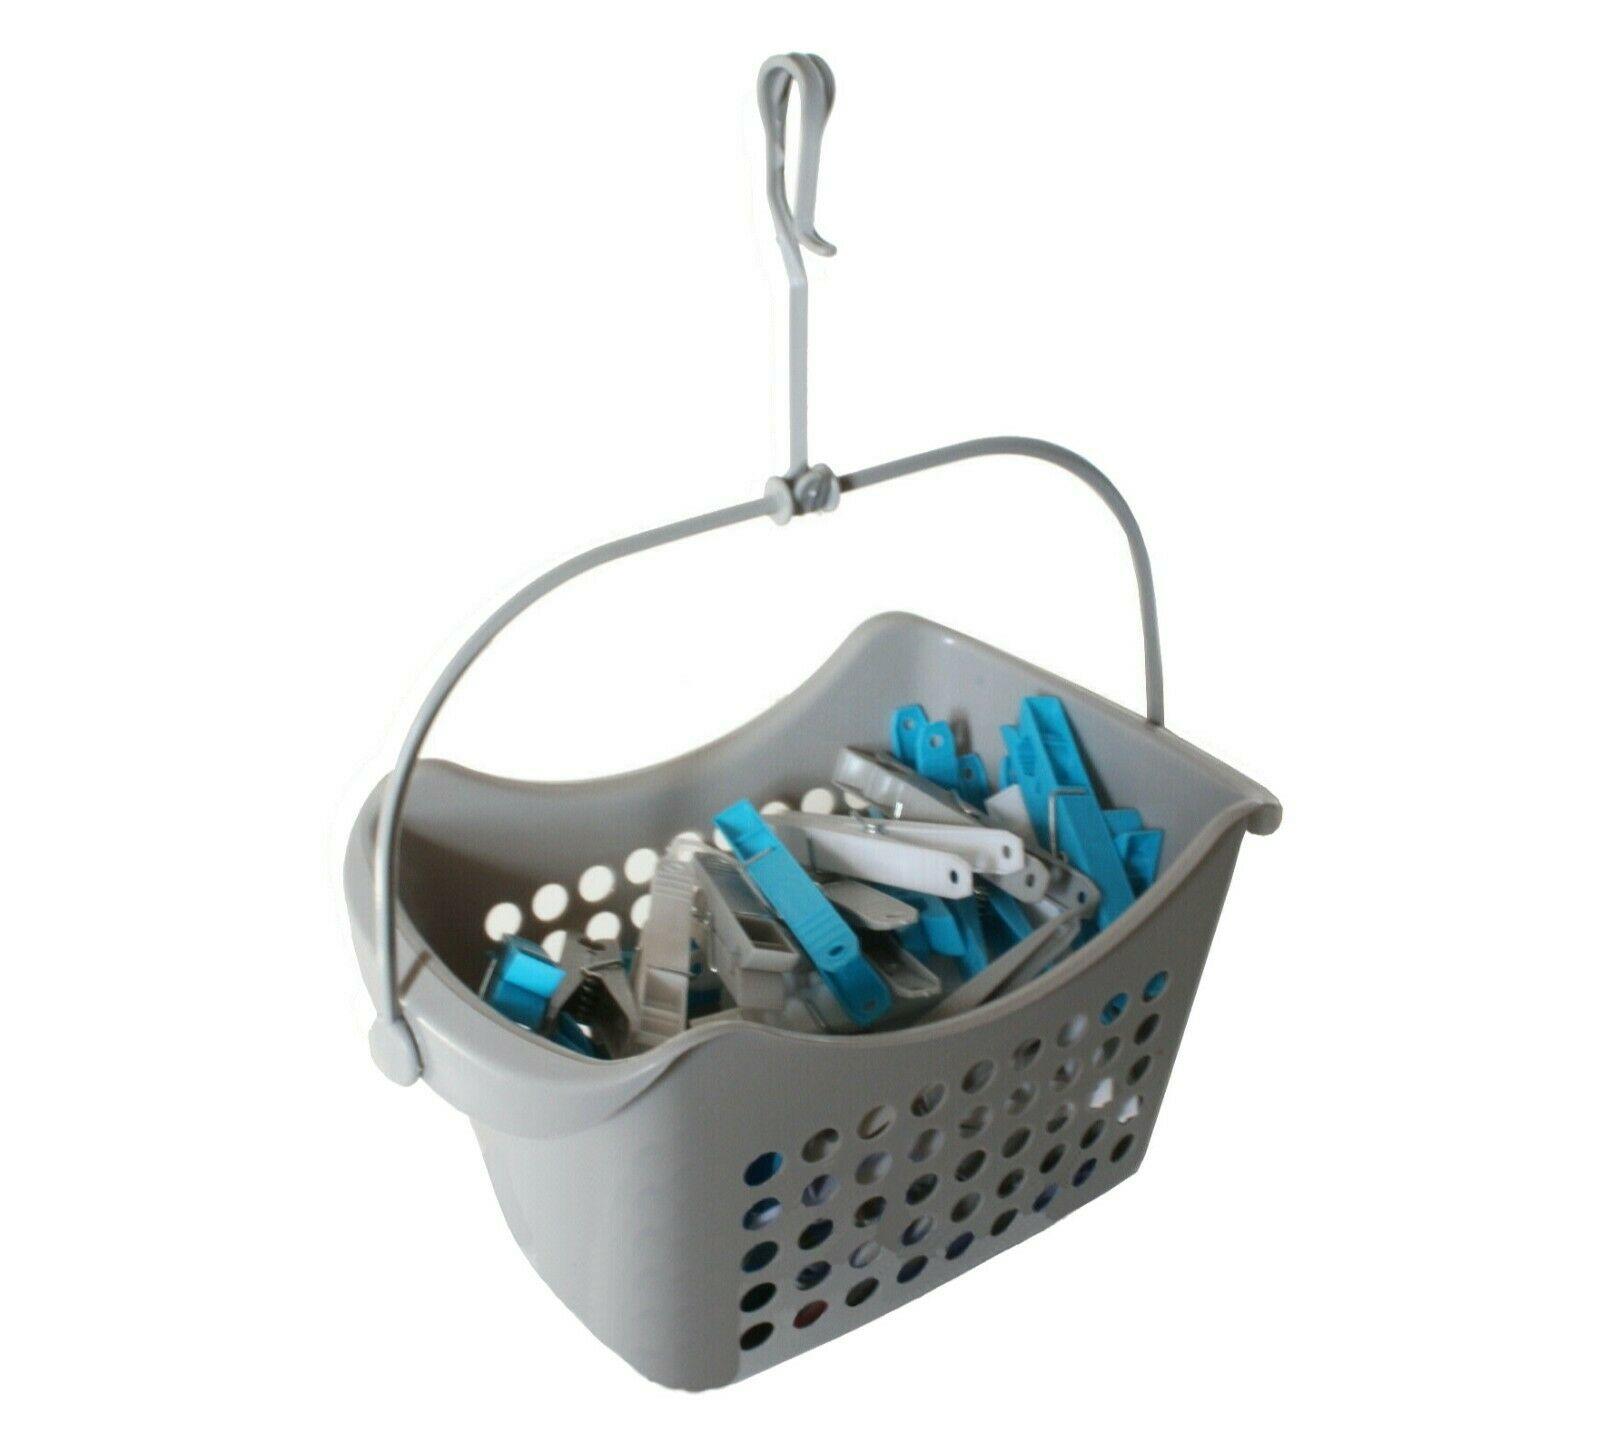 50 Clothes Pegs In Basket Hanging Collapsible With Hook Washing Line Plastic 